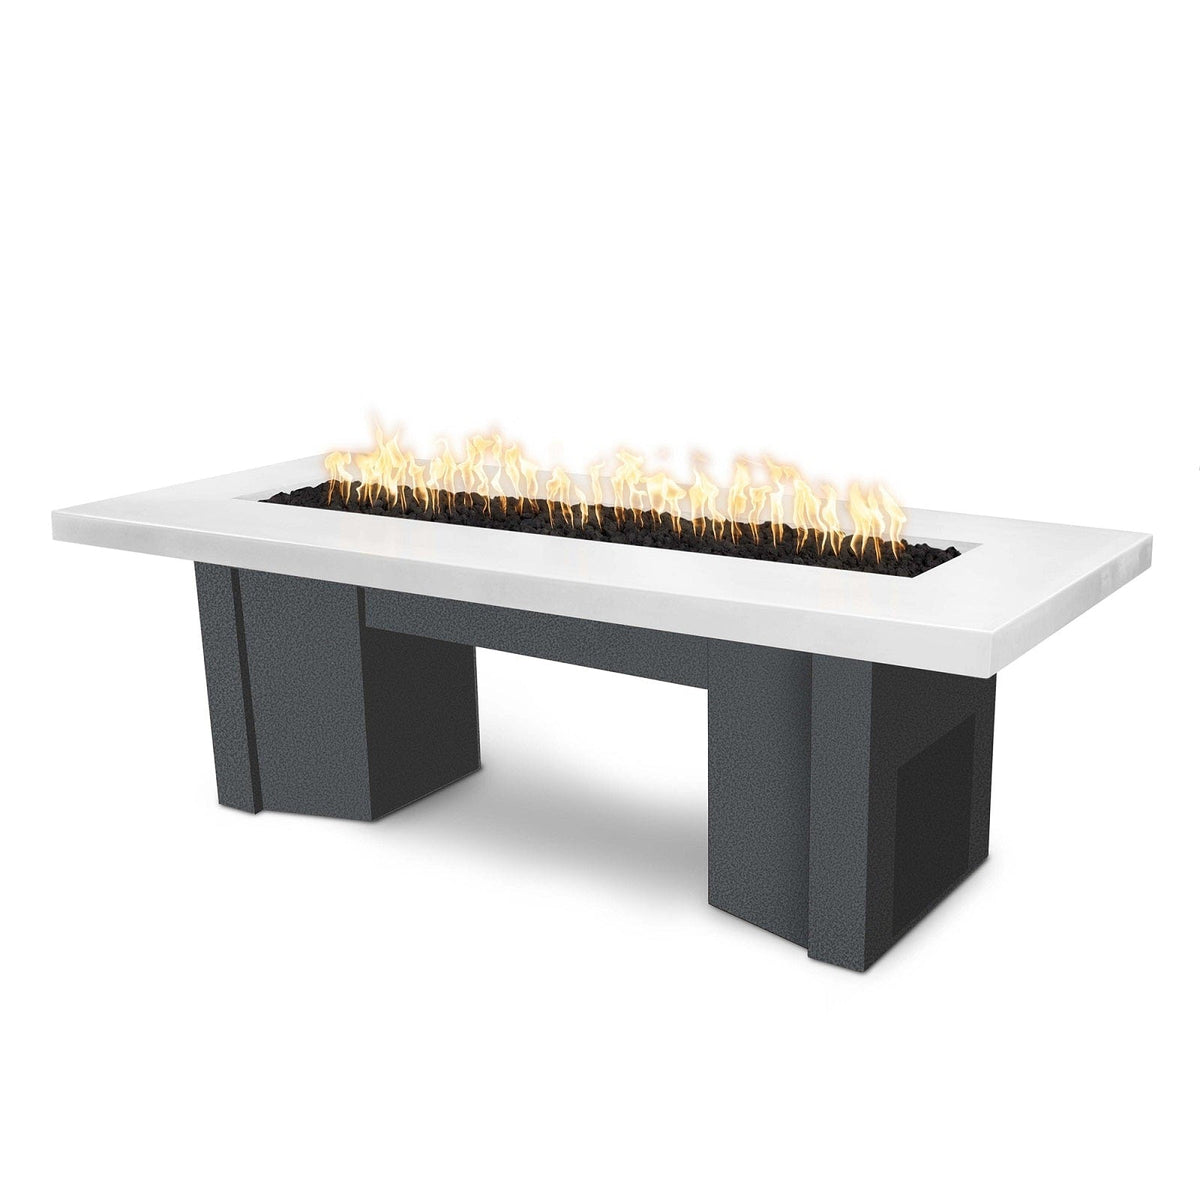 The Outdoor Plus Fire Features Limestone (-LIM) / Silver Vein Powder Coated Steel (-SLV) The Outdoor Plus 60&quot; Alameda Fire Table Smooth Concrete in Natural Gas - 110V Plug &amp; Play Electronic Ignition / OPT-ALMGFRC60EKIT-NG